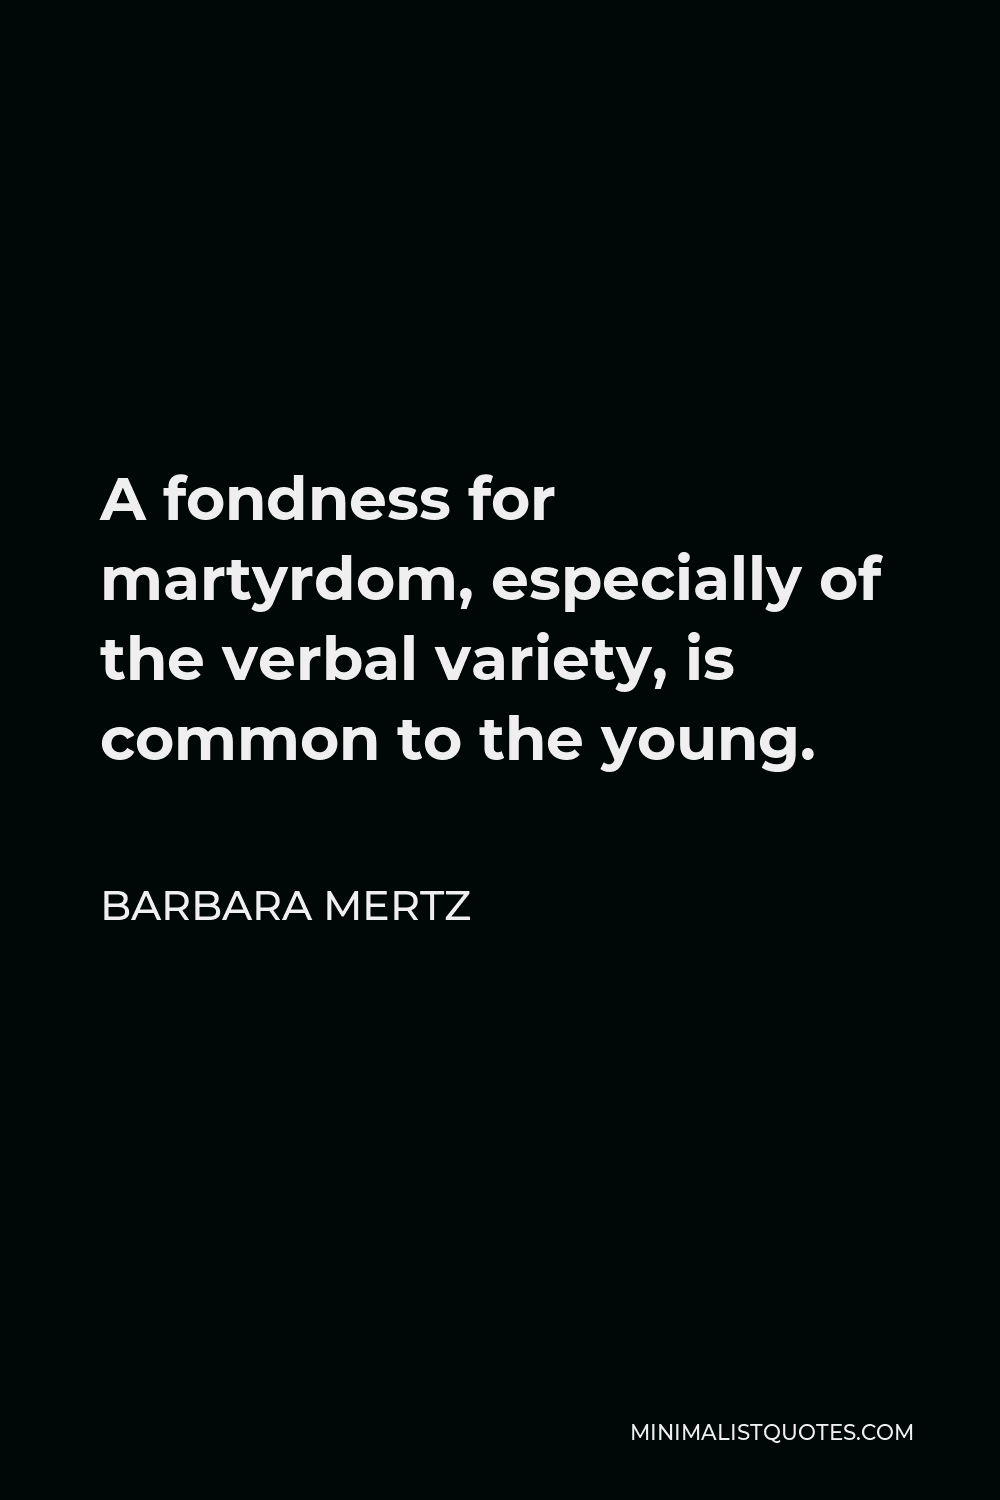 Barbara Mertz Quote - A fondness for martyrdom, especially of the verbal variety, is common to the young.